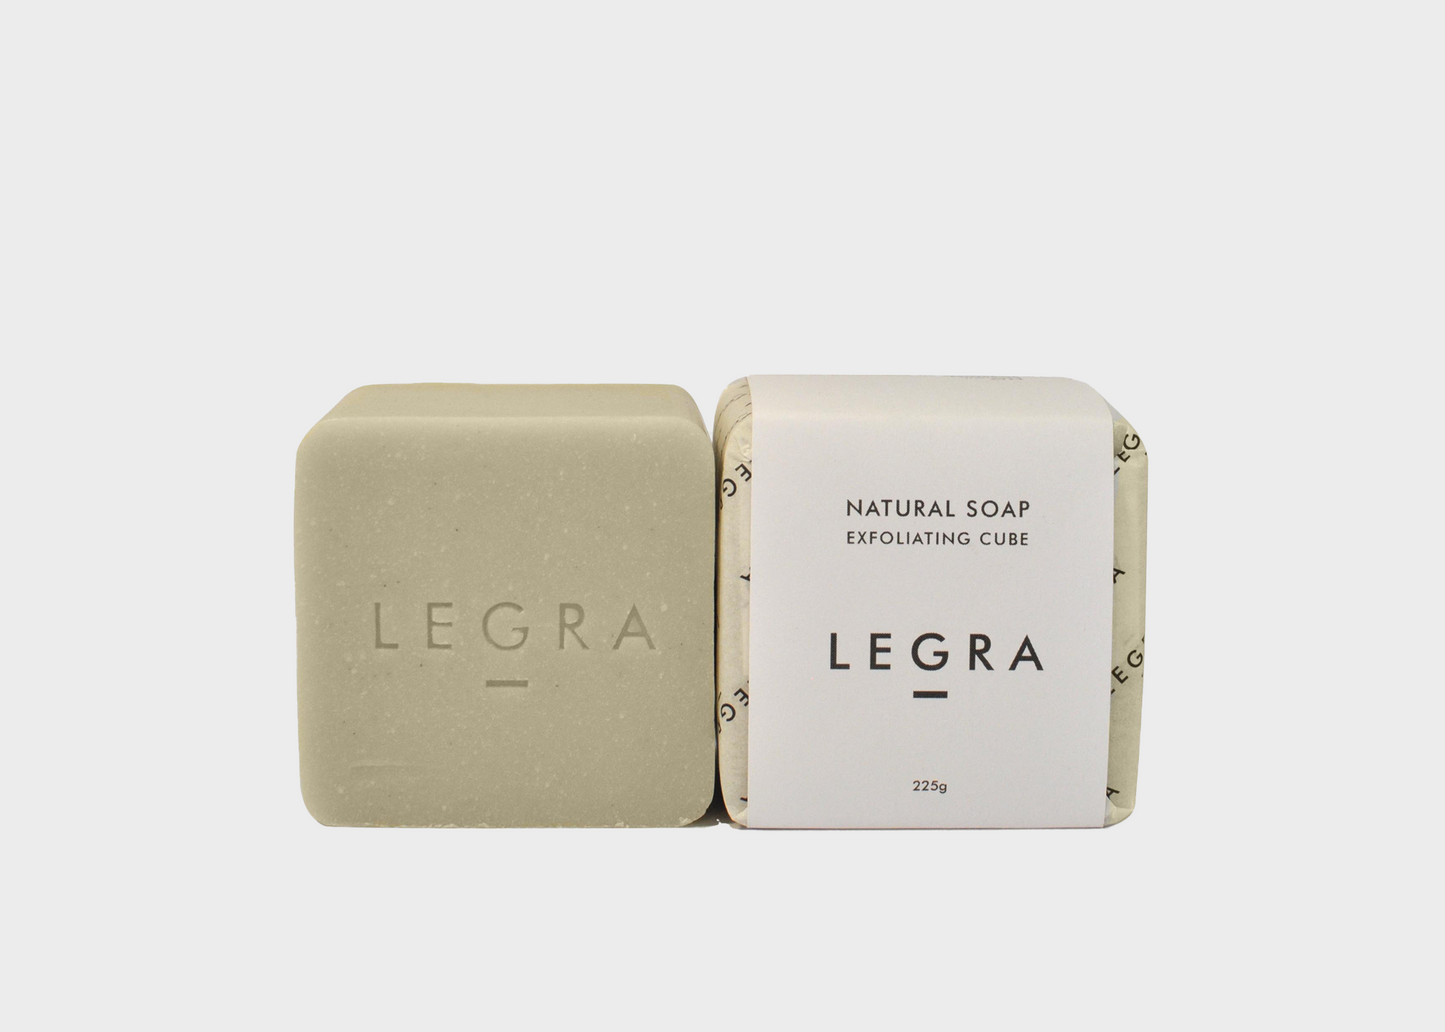 Legra Exfoliating Cube next to packaging